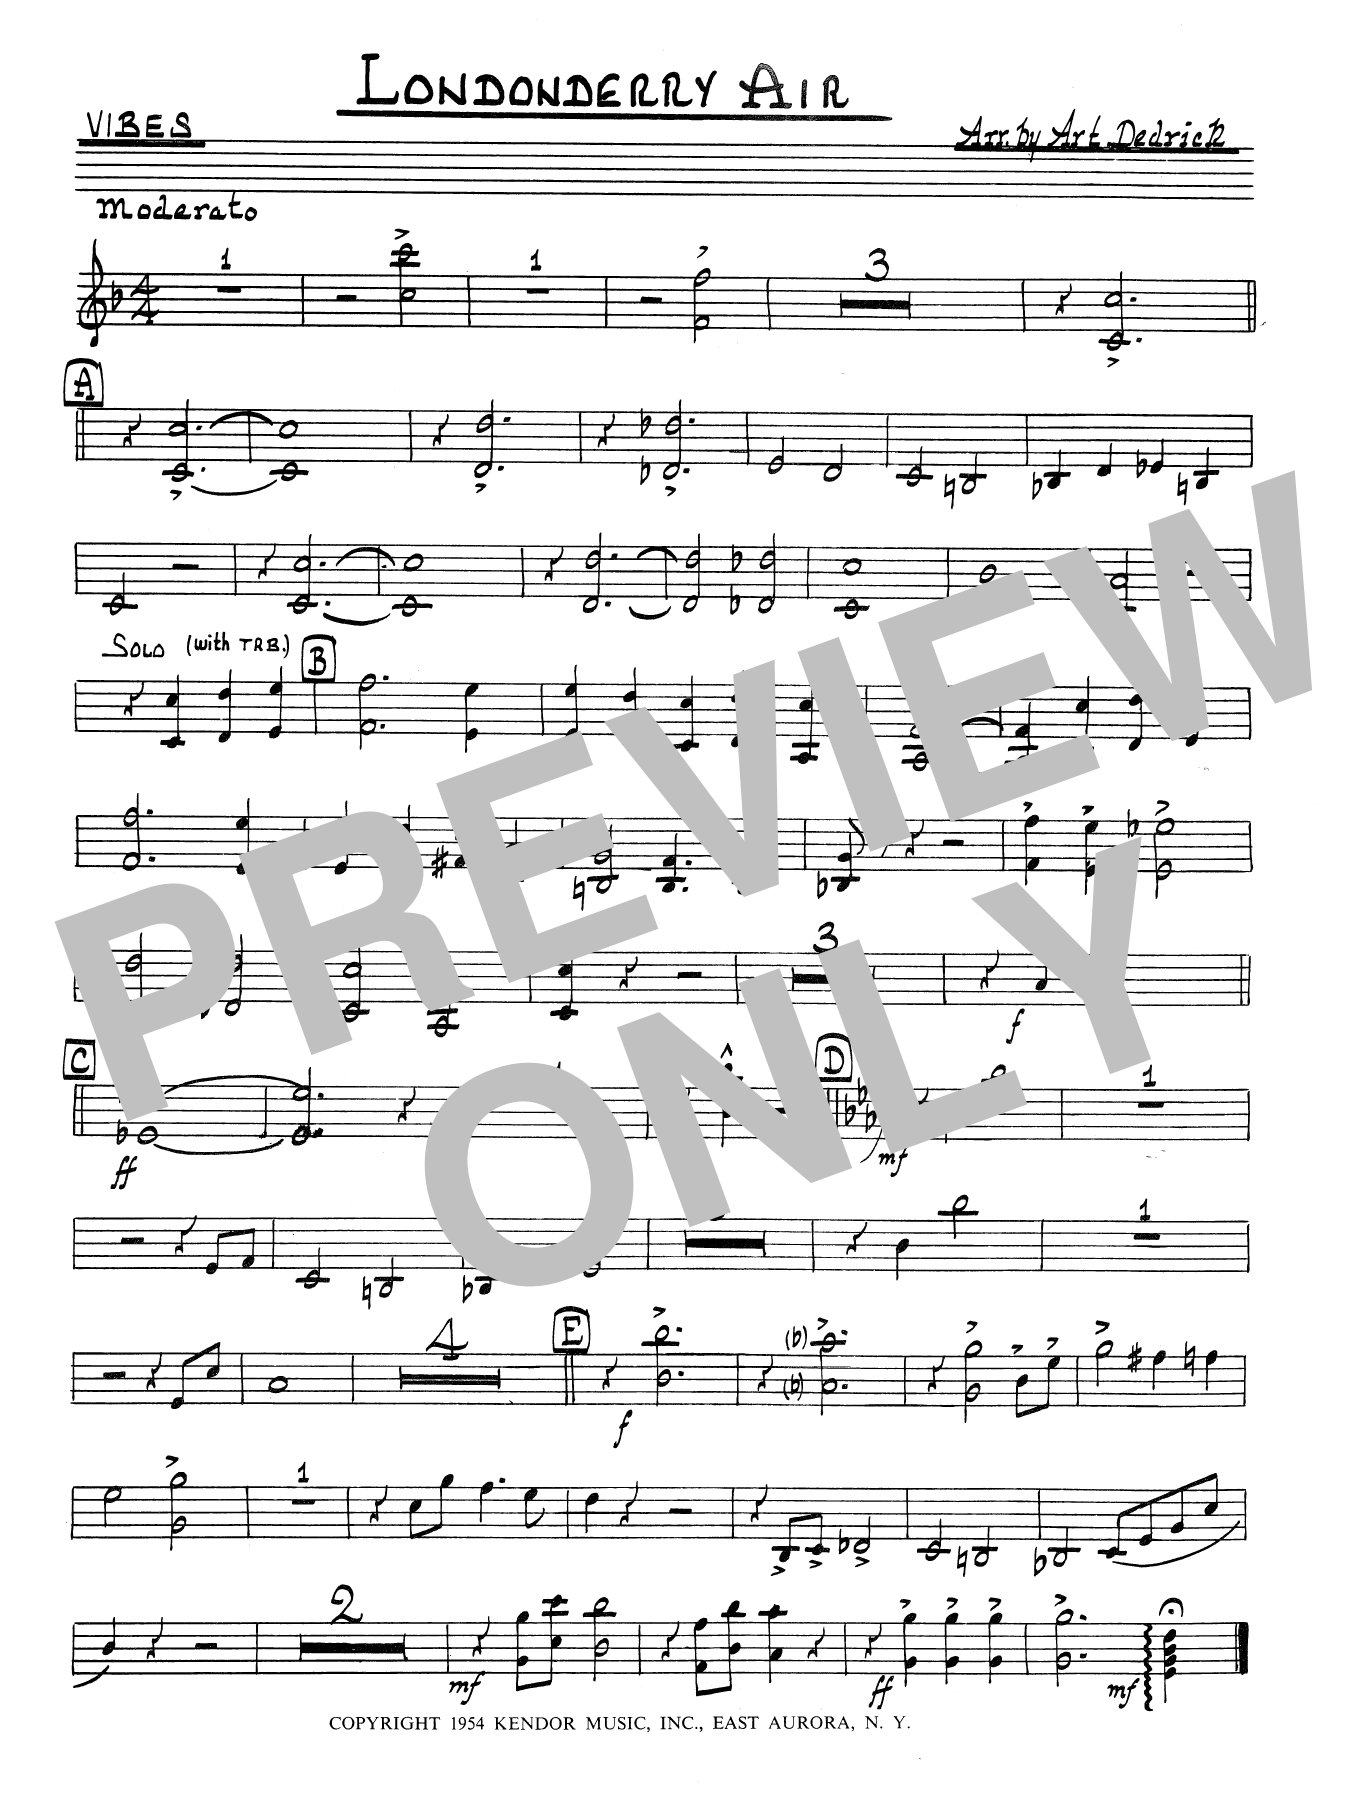 Art Dedrick Londonderry Air - Vibes sheet music preview music notes and score for Jazz Ensemble including 1 page(s)